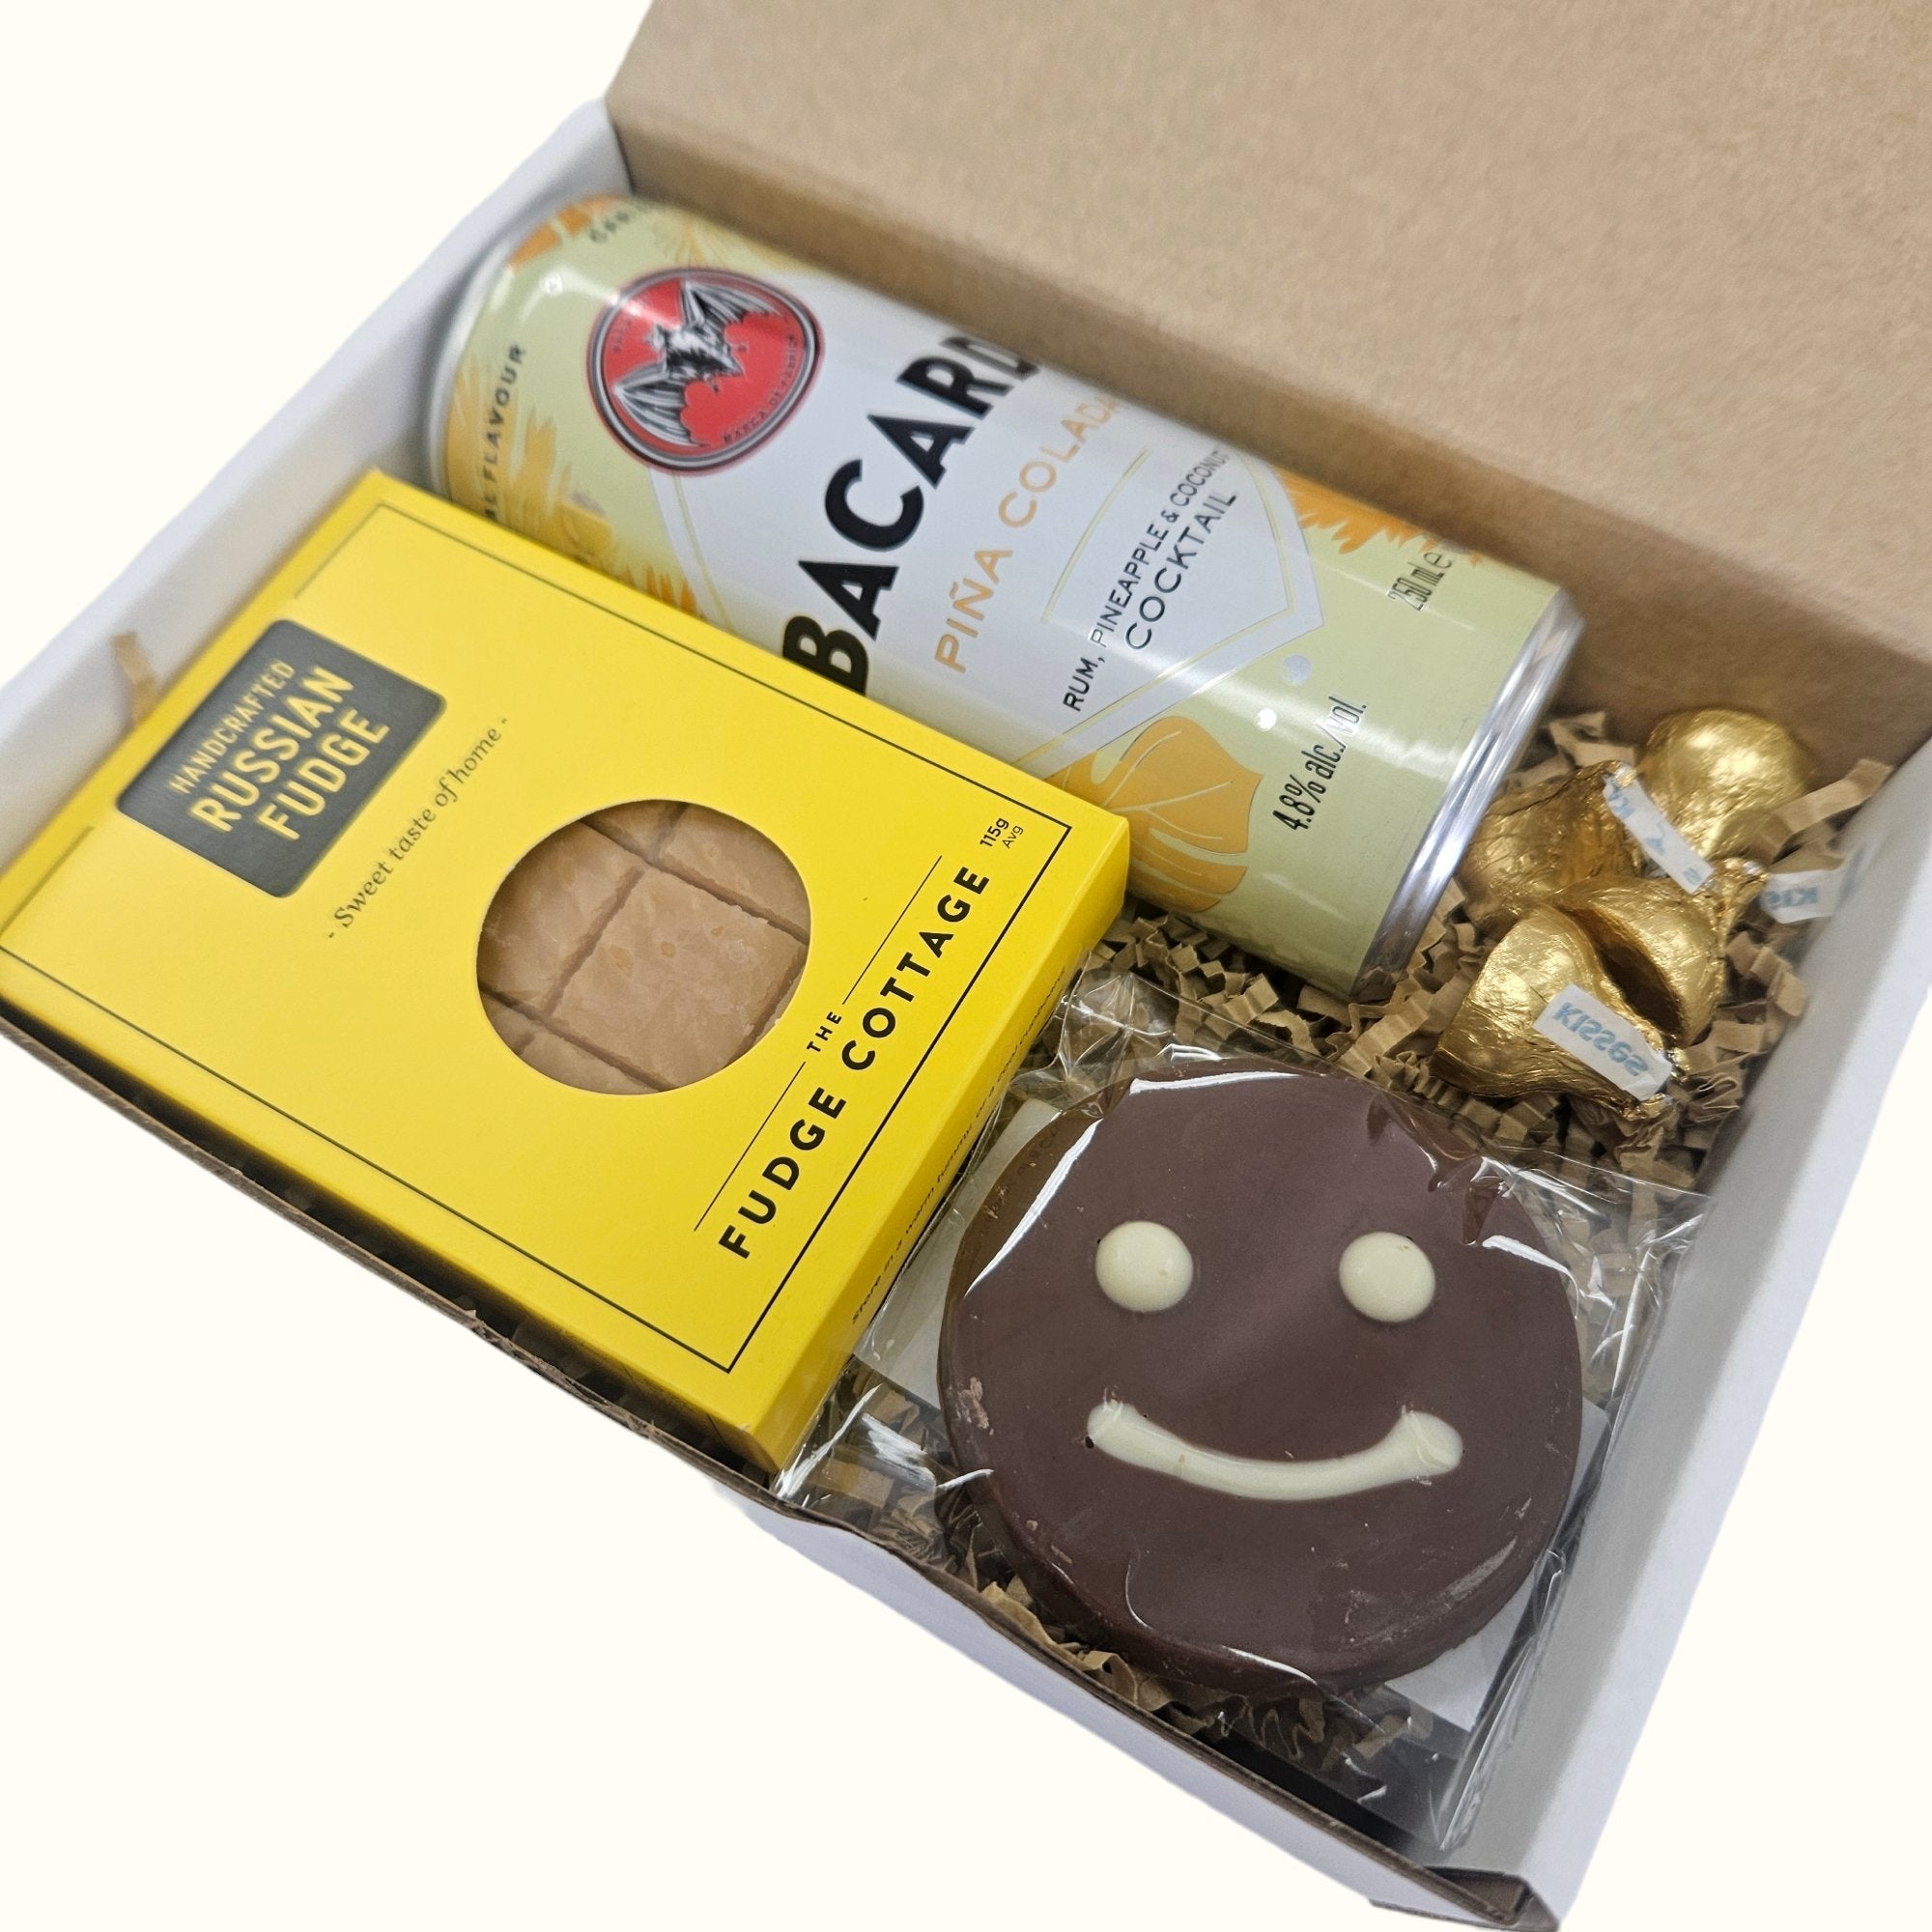 Pina Colada Smiles (Free delivery) - Beautiful Gifts